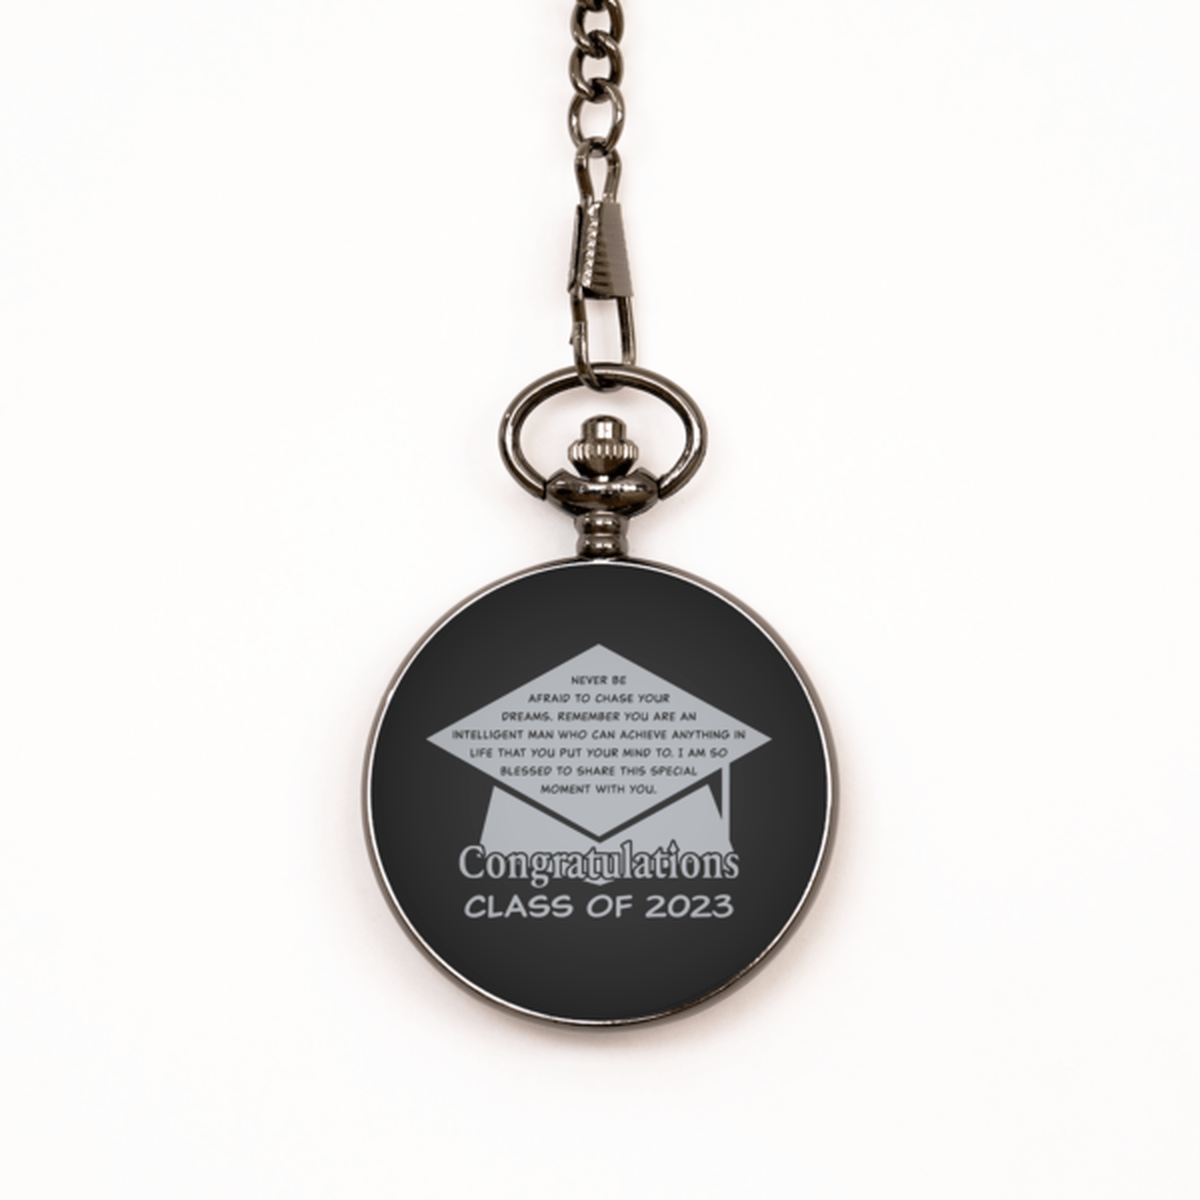 Class of 2023 Graduation Gift - Black Pocket Watch - Graduation Gift for Nephew, Son, Grandson, Brother